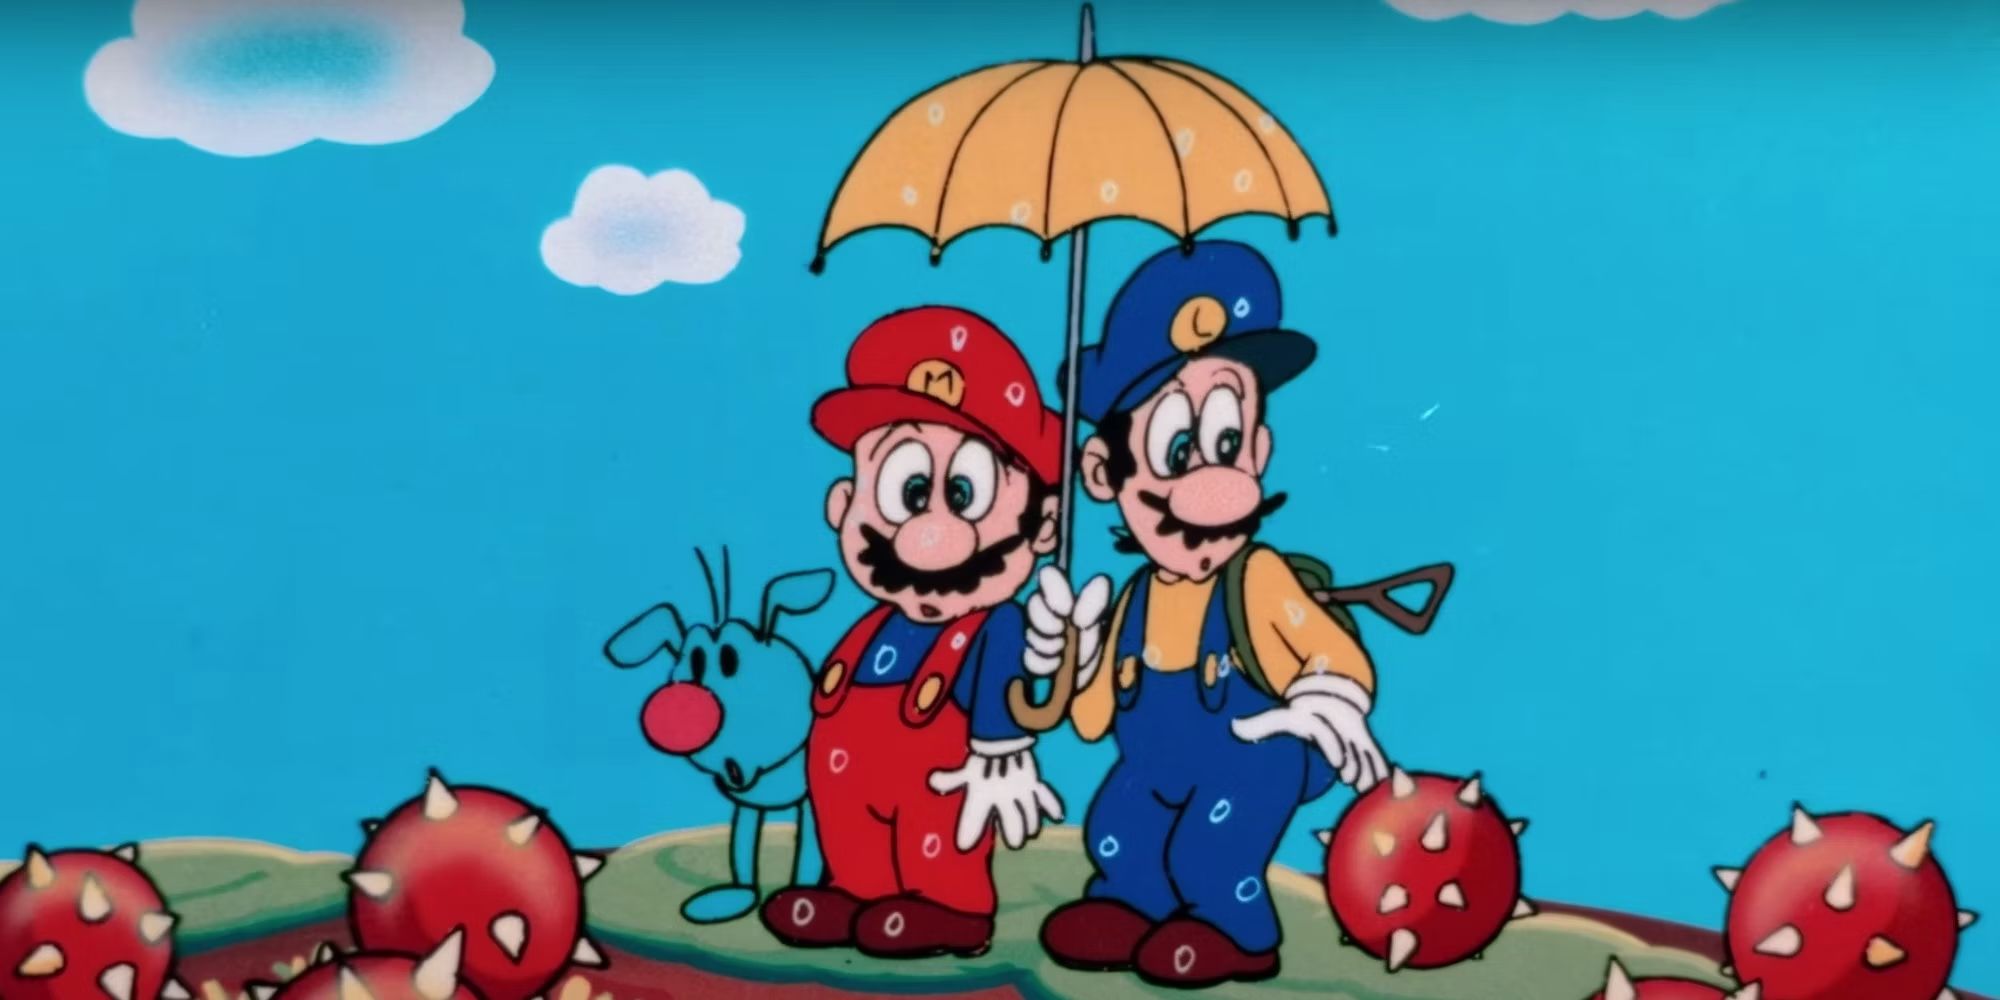 Screen shot Mario, Luigi, and a red-nosed dog from the 1986 Mario anime movie.